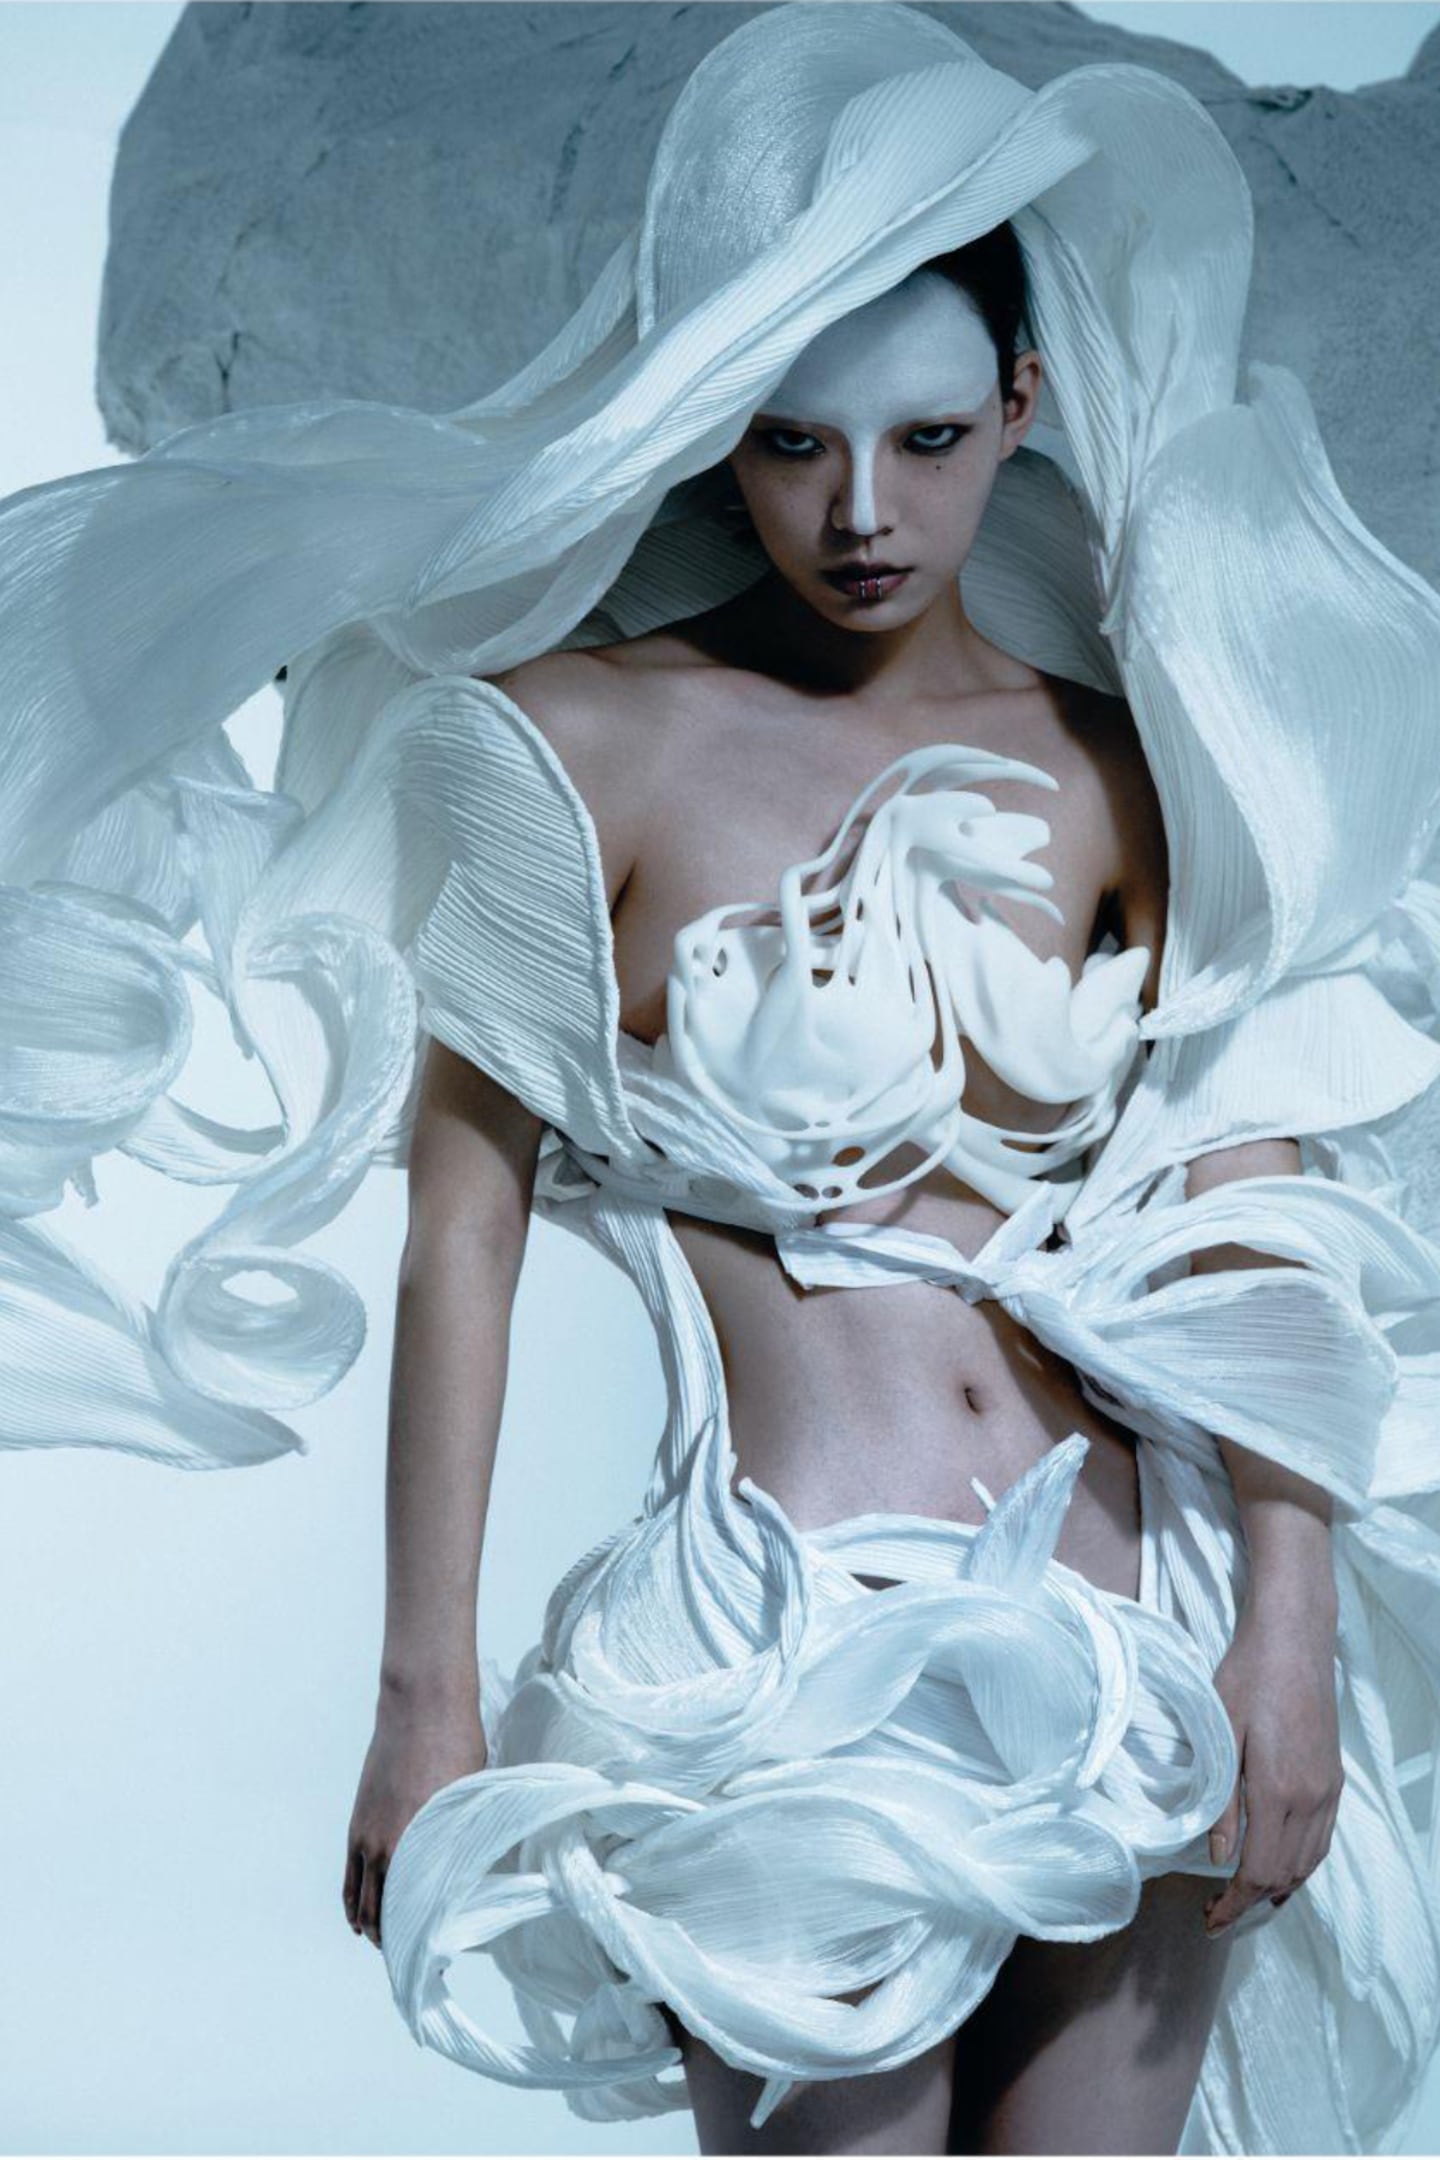 A photorealistic digital model stares directly into the camera, dressed in a surreal dress of billowing white fabric.